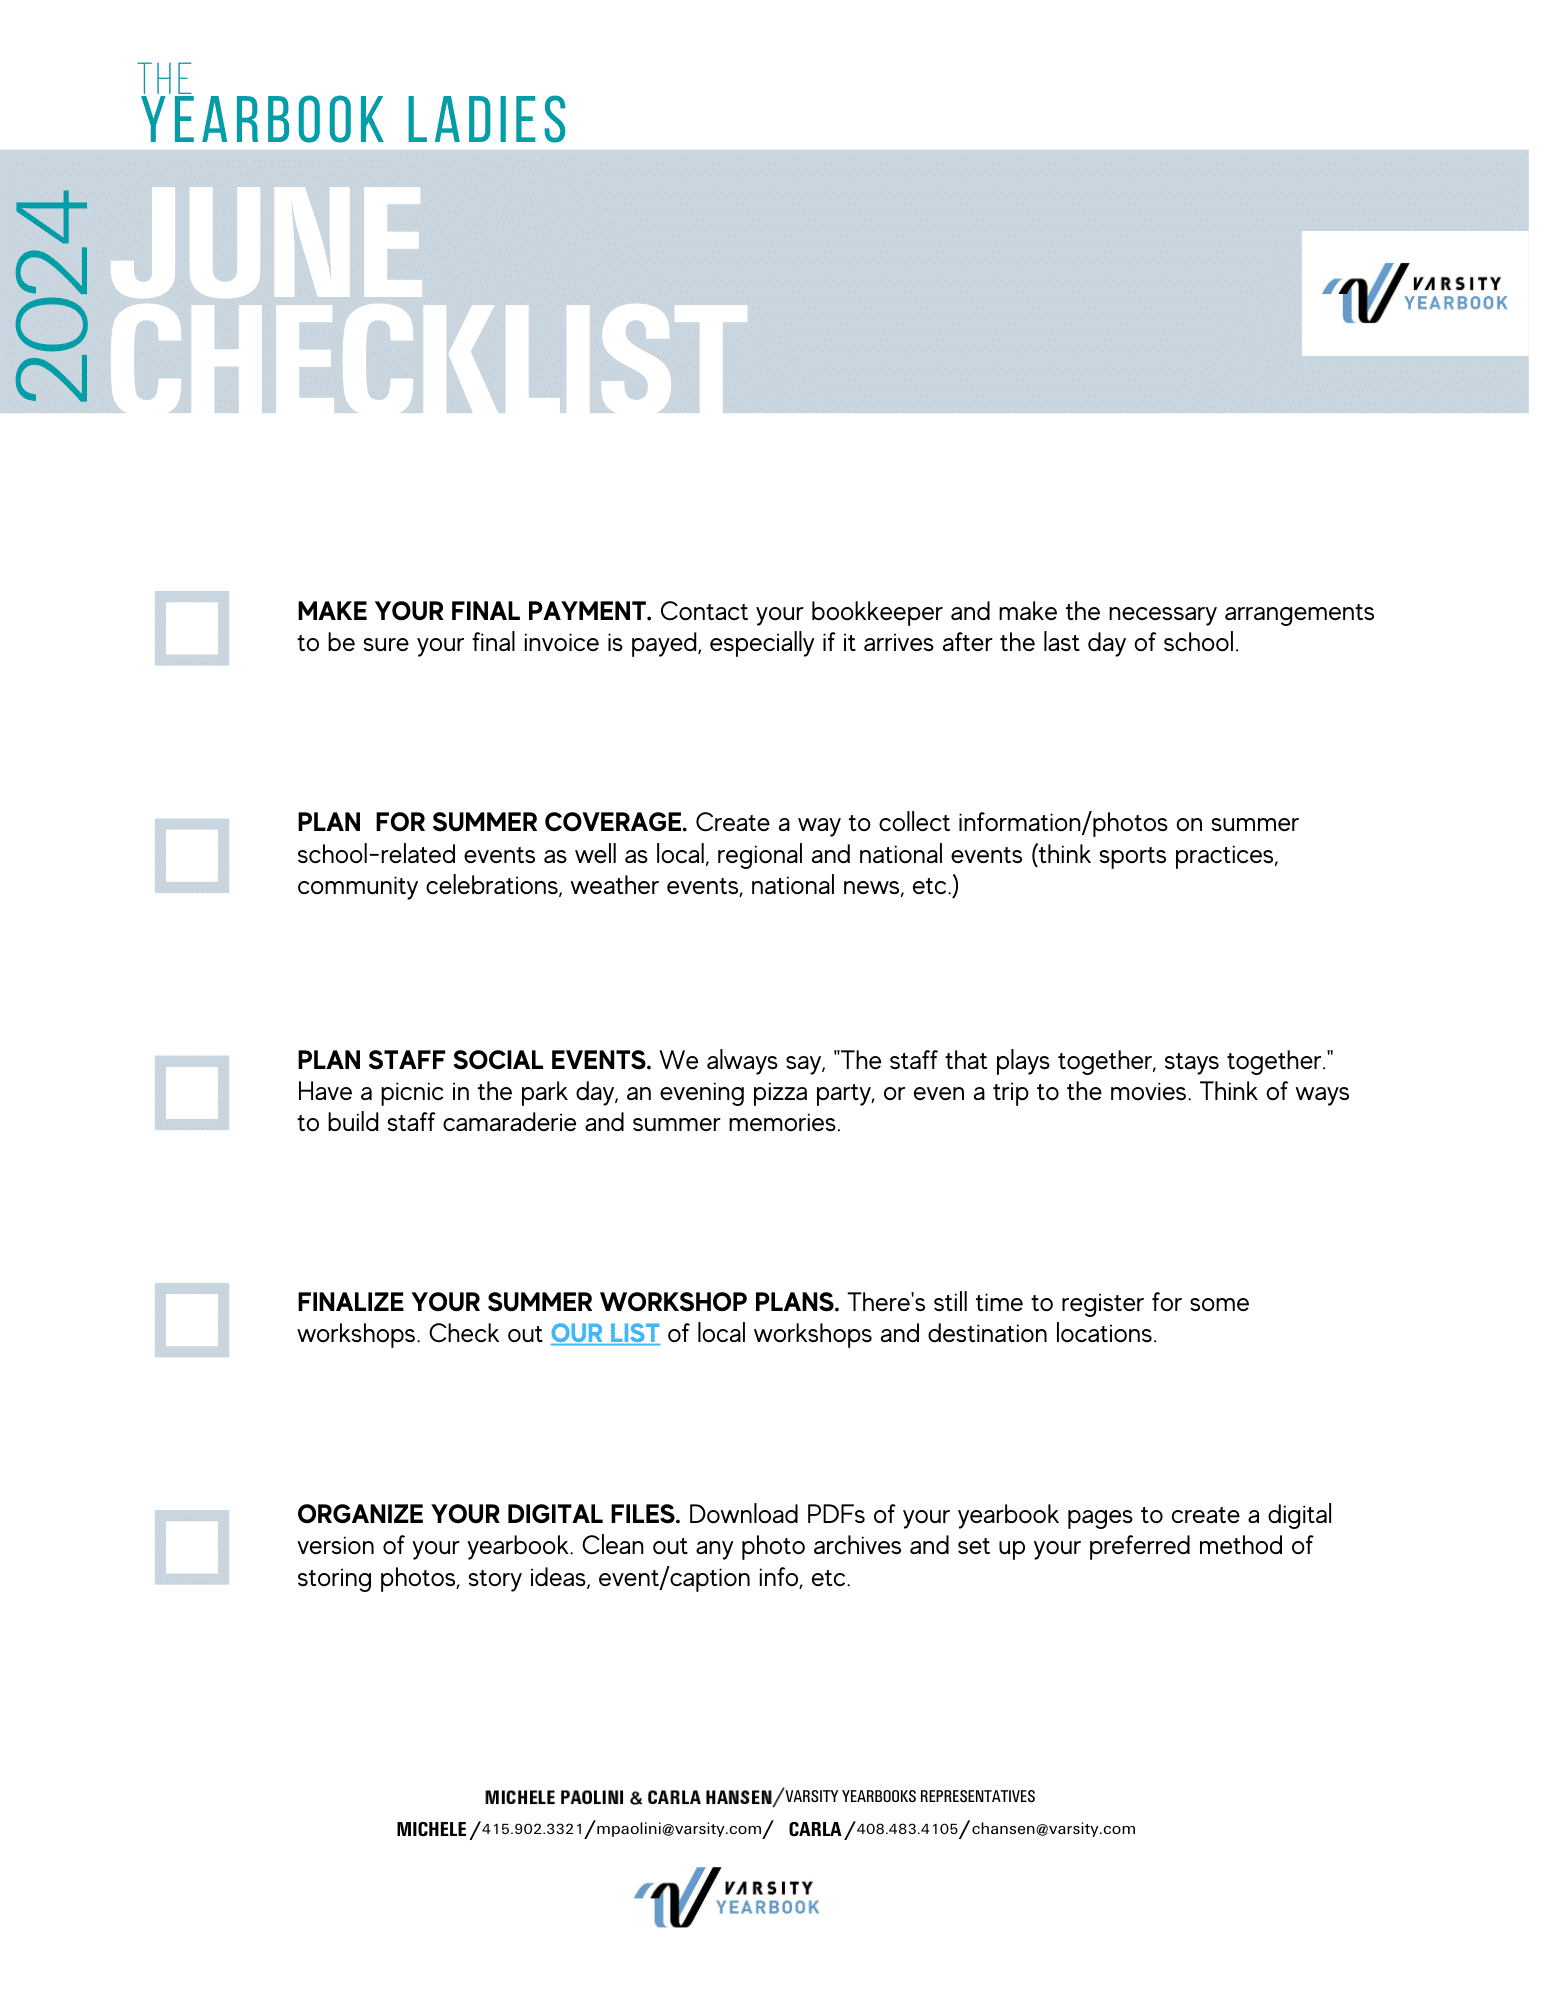 Checklist with 5 items: Make your final payment. Plan for summer coverage. Plan Staff social events. Finalize your Summer Workshop plans. Organize your digital files.